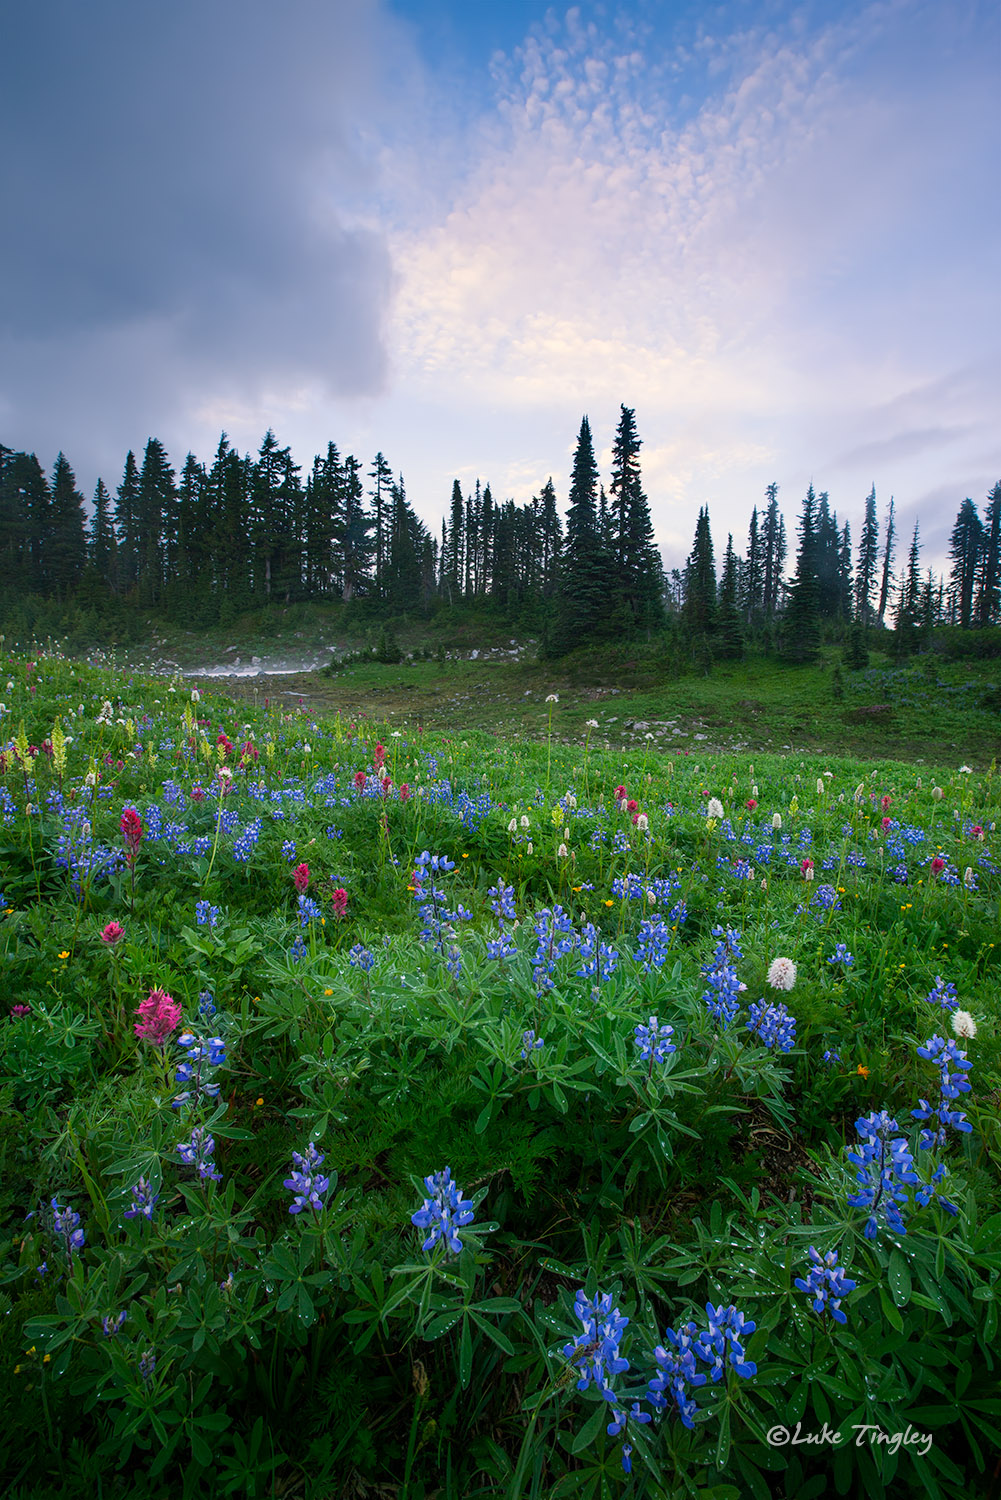 A brief moment of blue sky and wild flowers as far as the eye can see on Mazama Ridge.